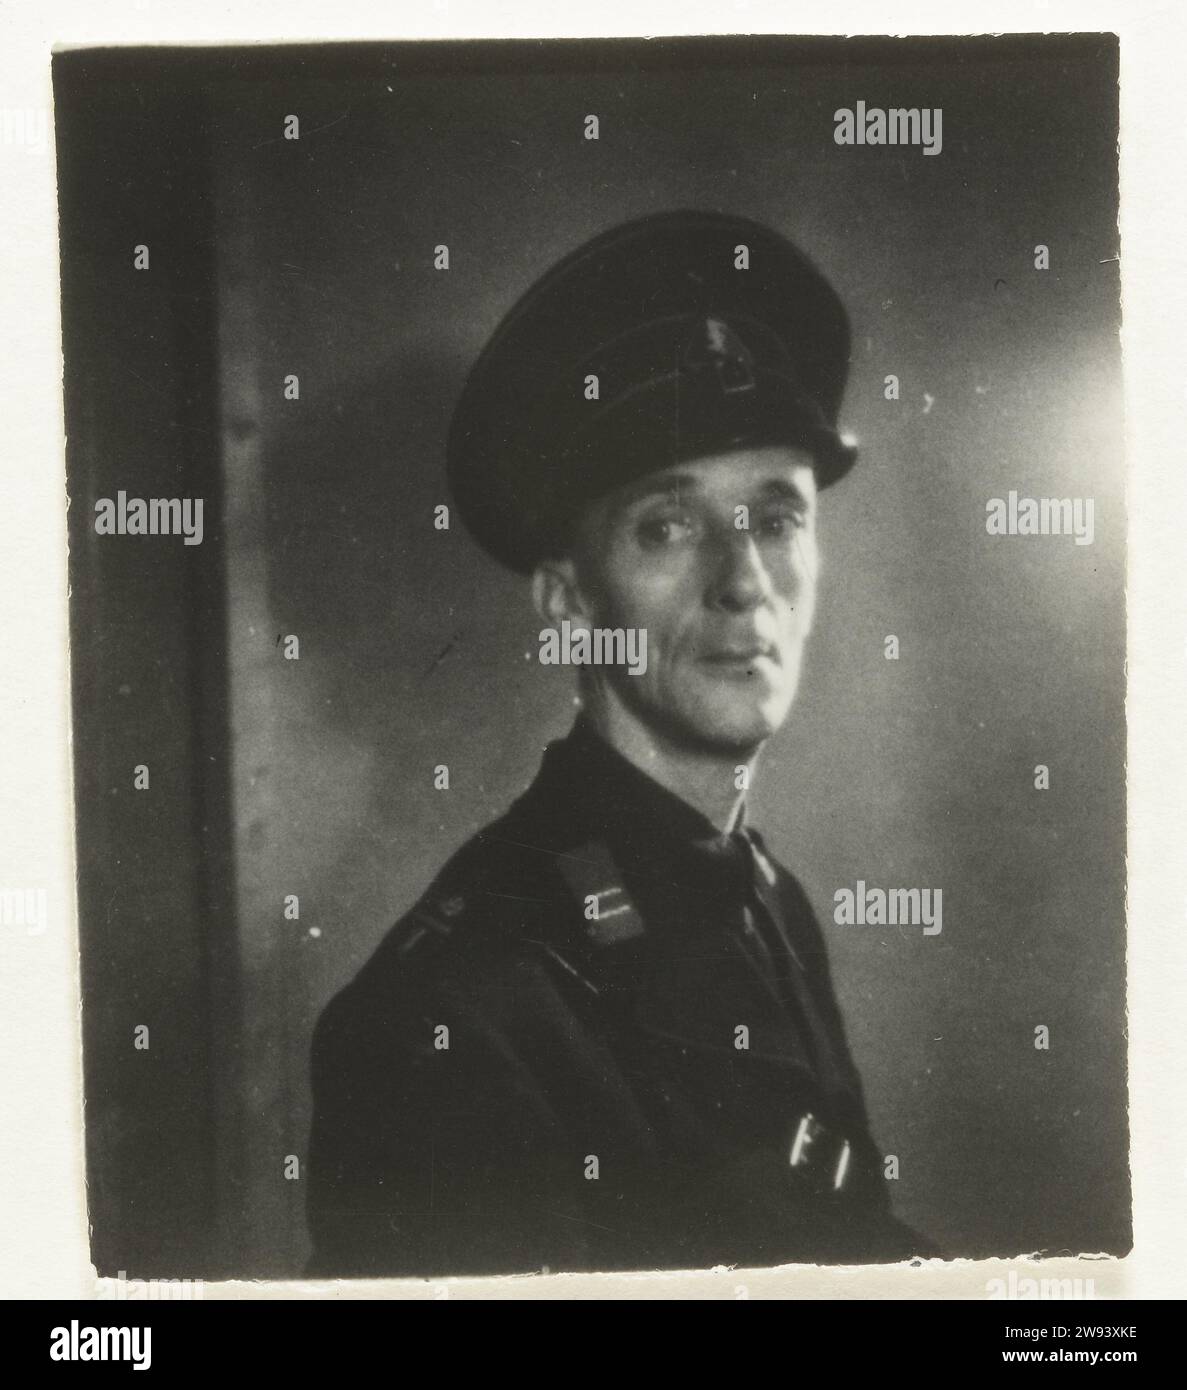 Portrait of a member of De Wa, 1940 - 1944 contact print Portrait of a member of the WA. On his collar a distinctive with two stripes: watchmaster, men. Belt diagonally over the chest. Pet with wolfsangel on his head. Lean face. Netherlands photographic support gelatin silver print anonymous historical person portrayed Netherlands Stock Photo